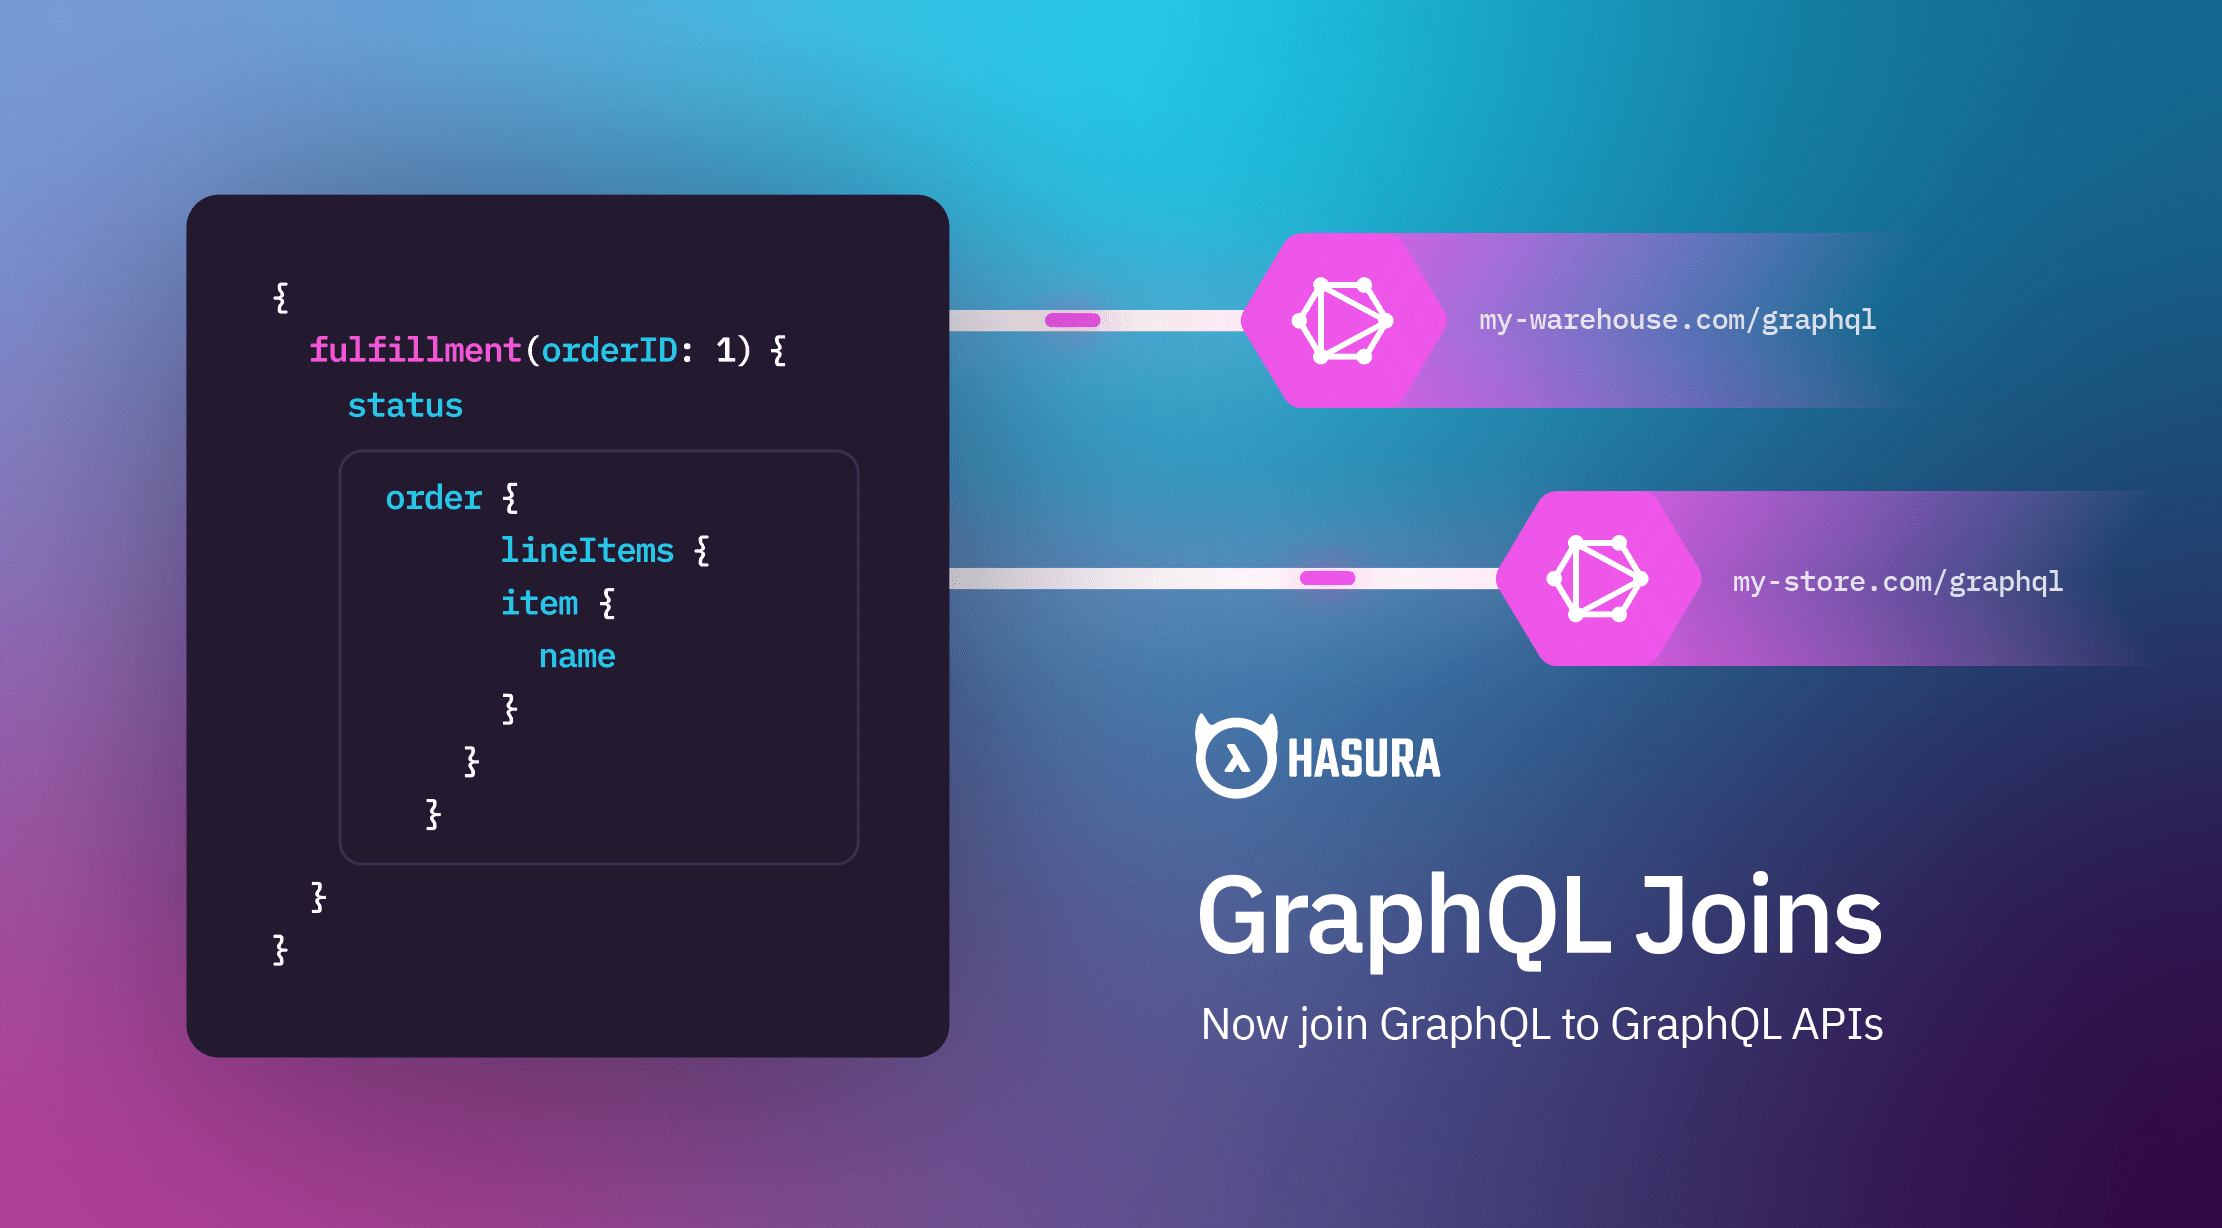 Introducing GraphQL Joins for federating data across GraphQL services